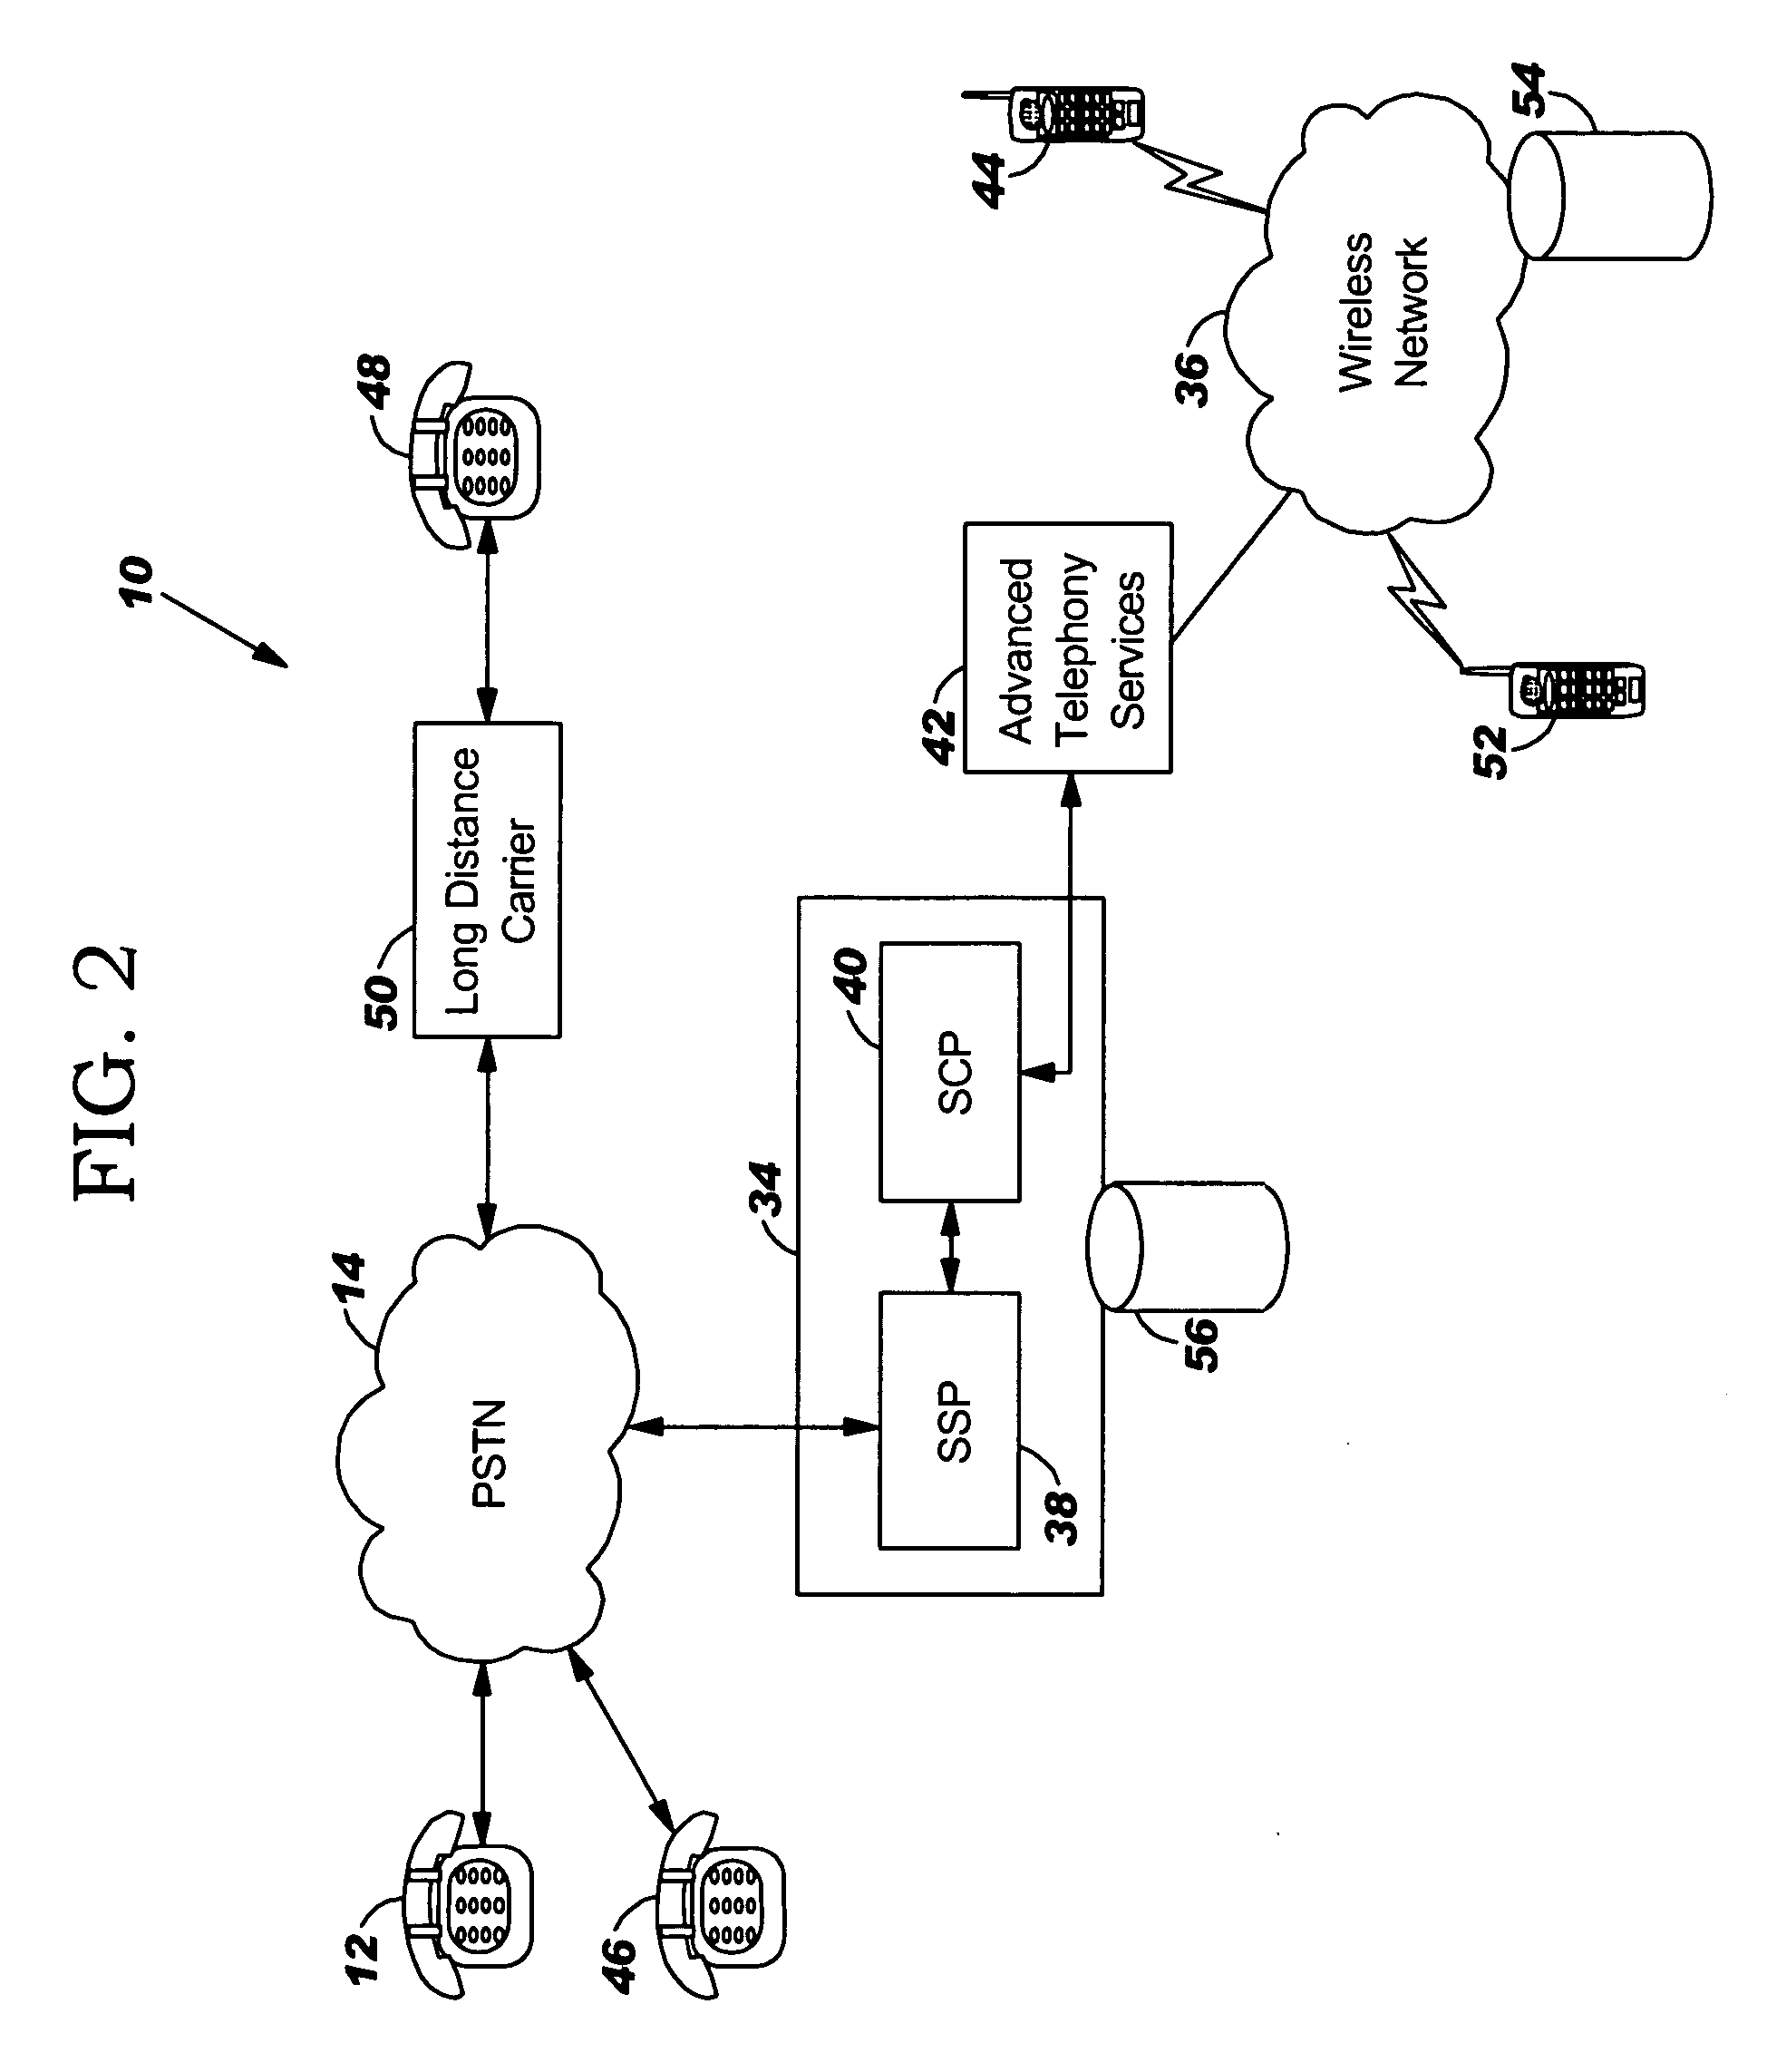 System and method for providing usage monitoring telephony services